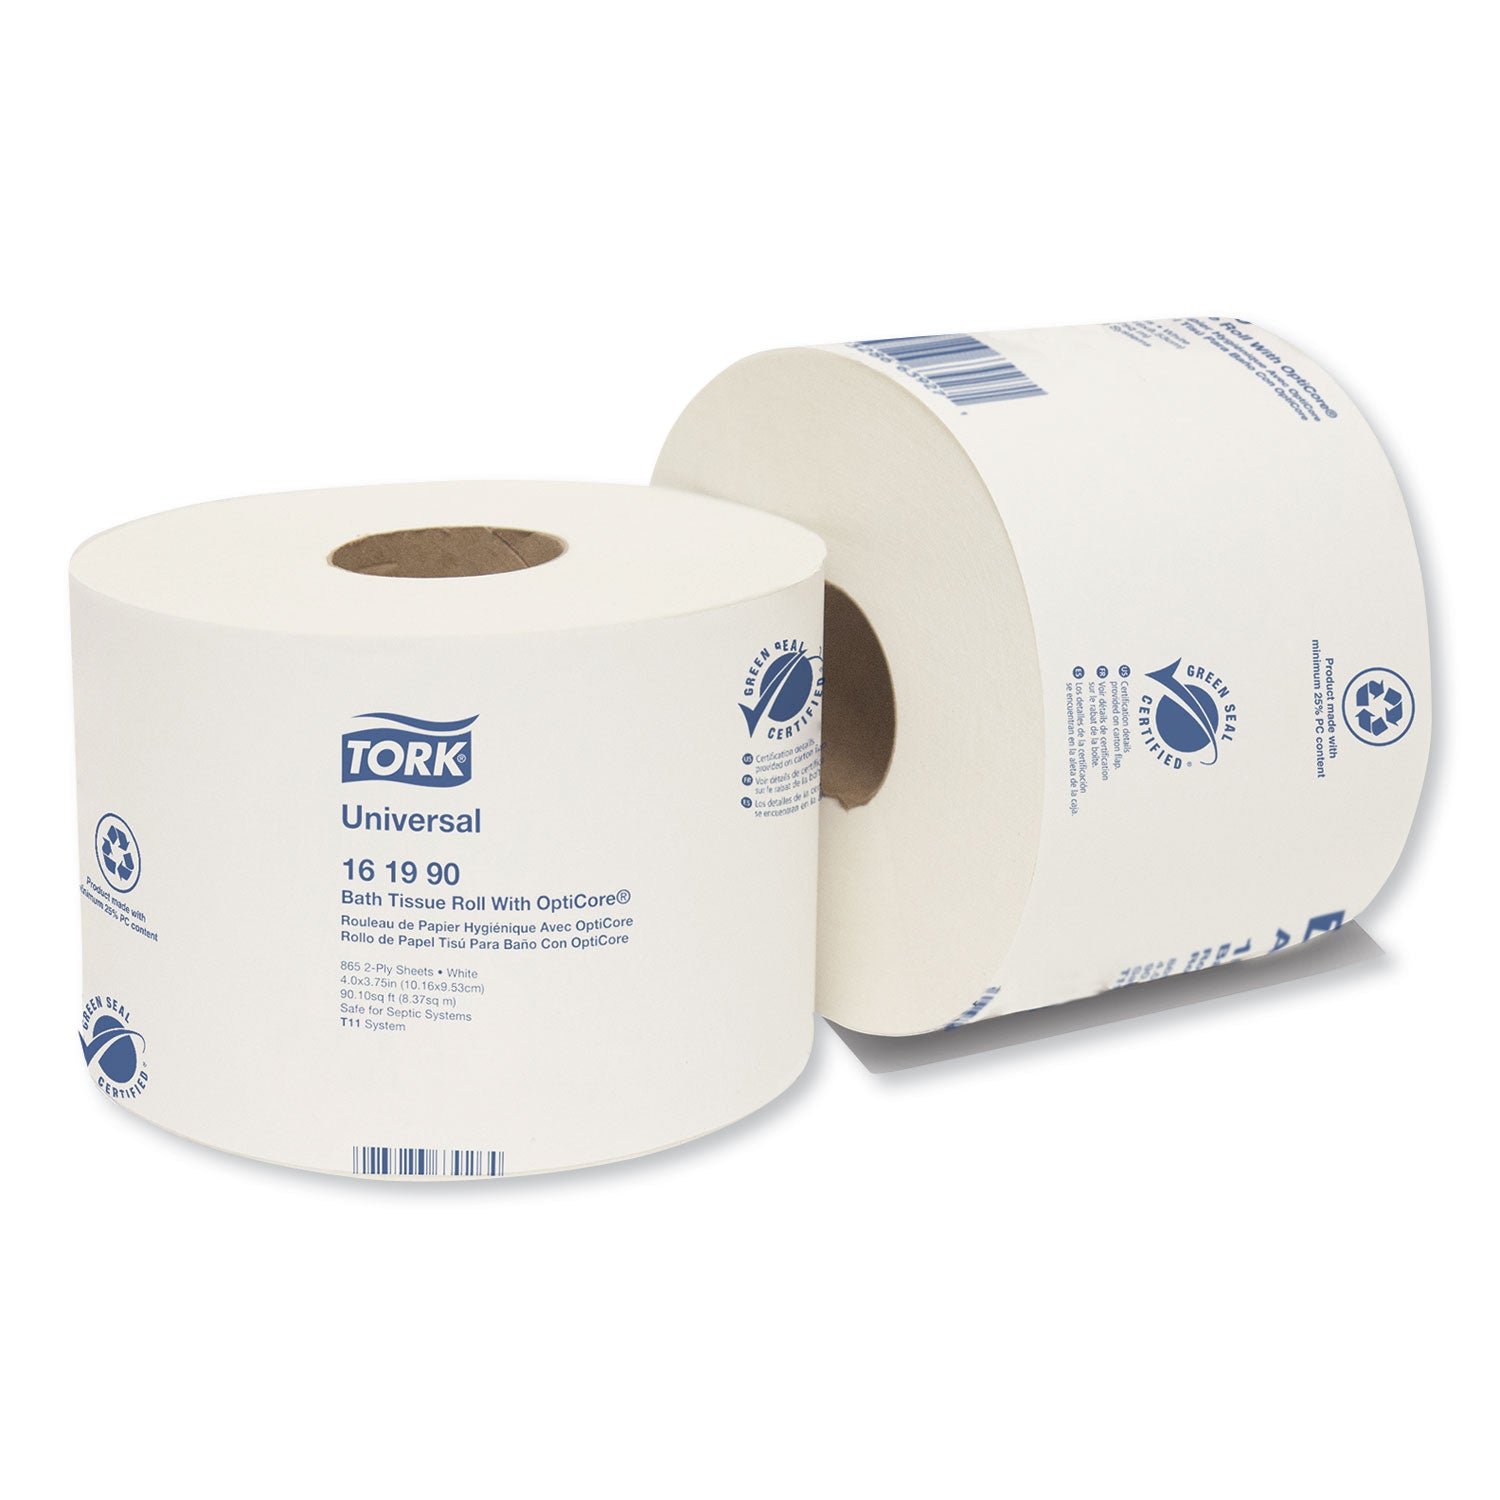 universal-bath-tissue-roll-with-opticore-septic-safe-2-ply-white-865-sheets-roll-36-carton_trk161990 - 1